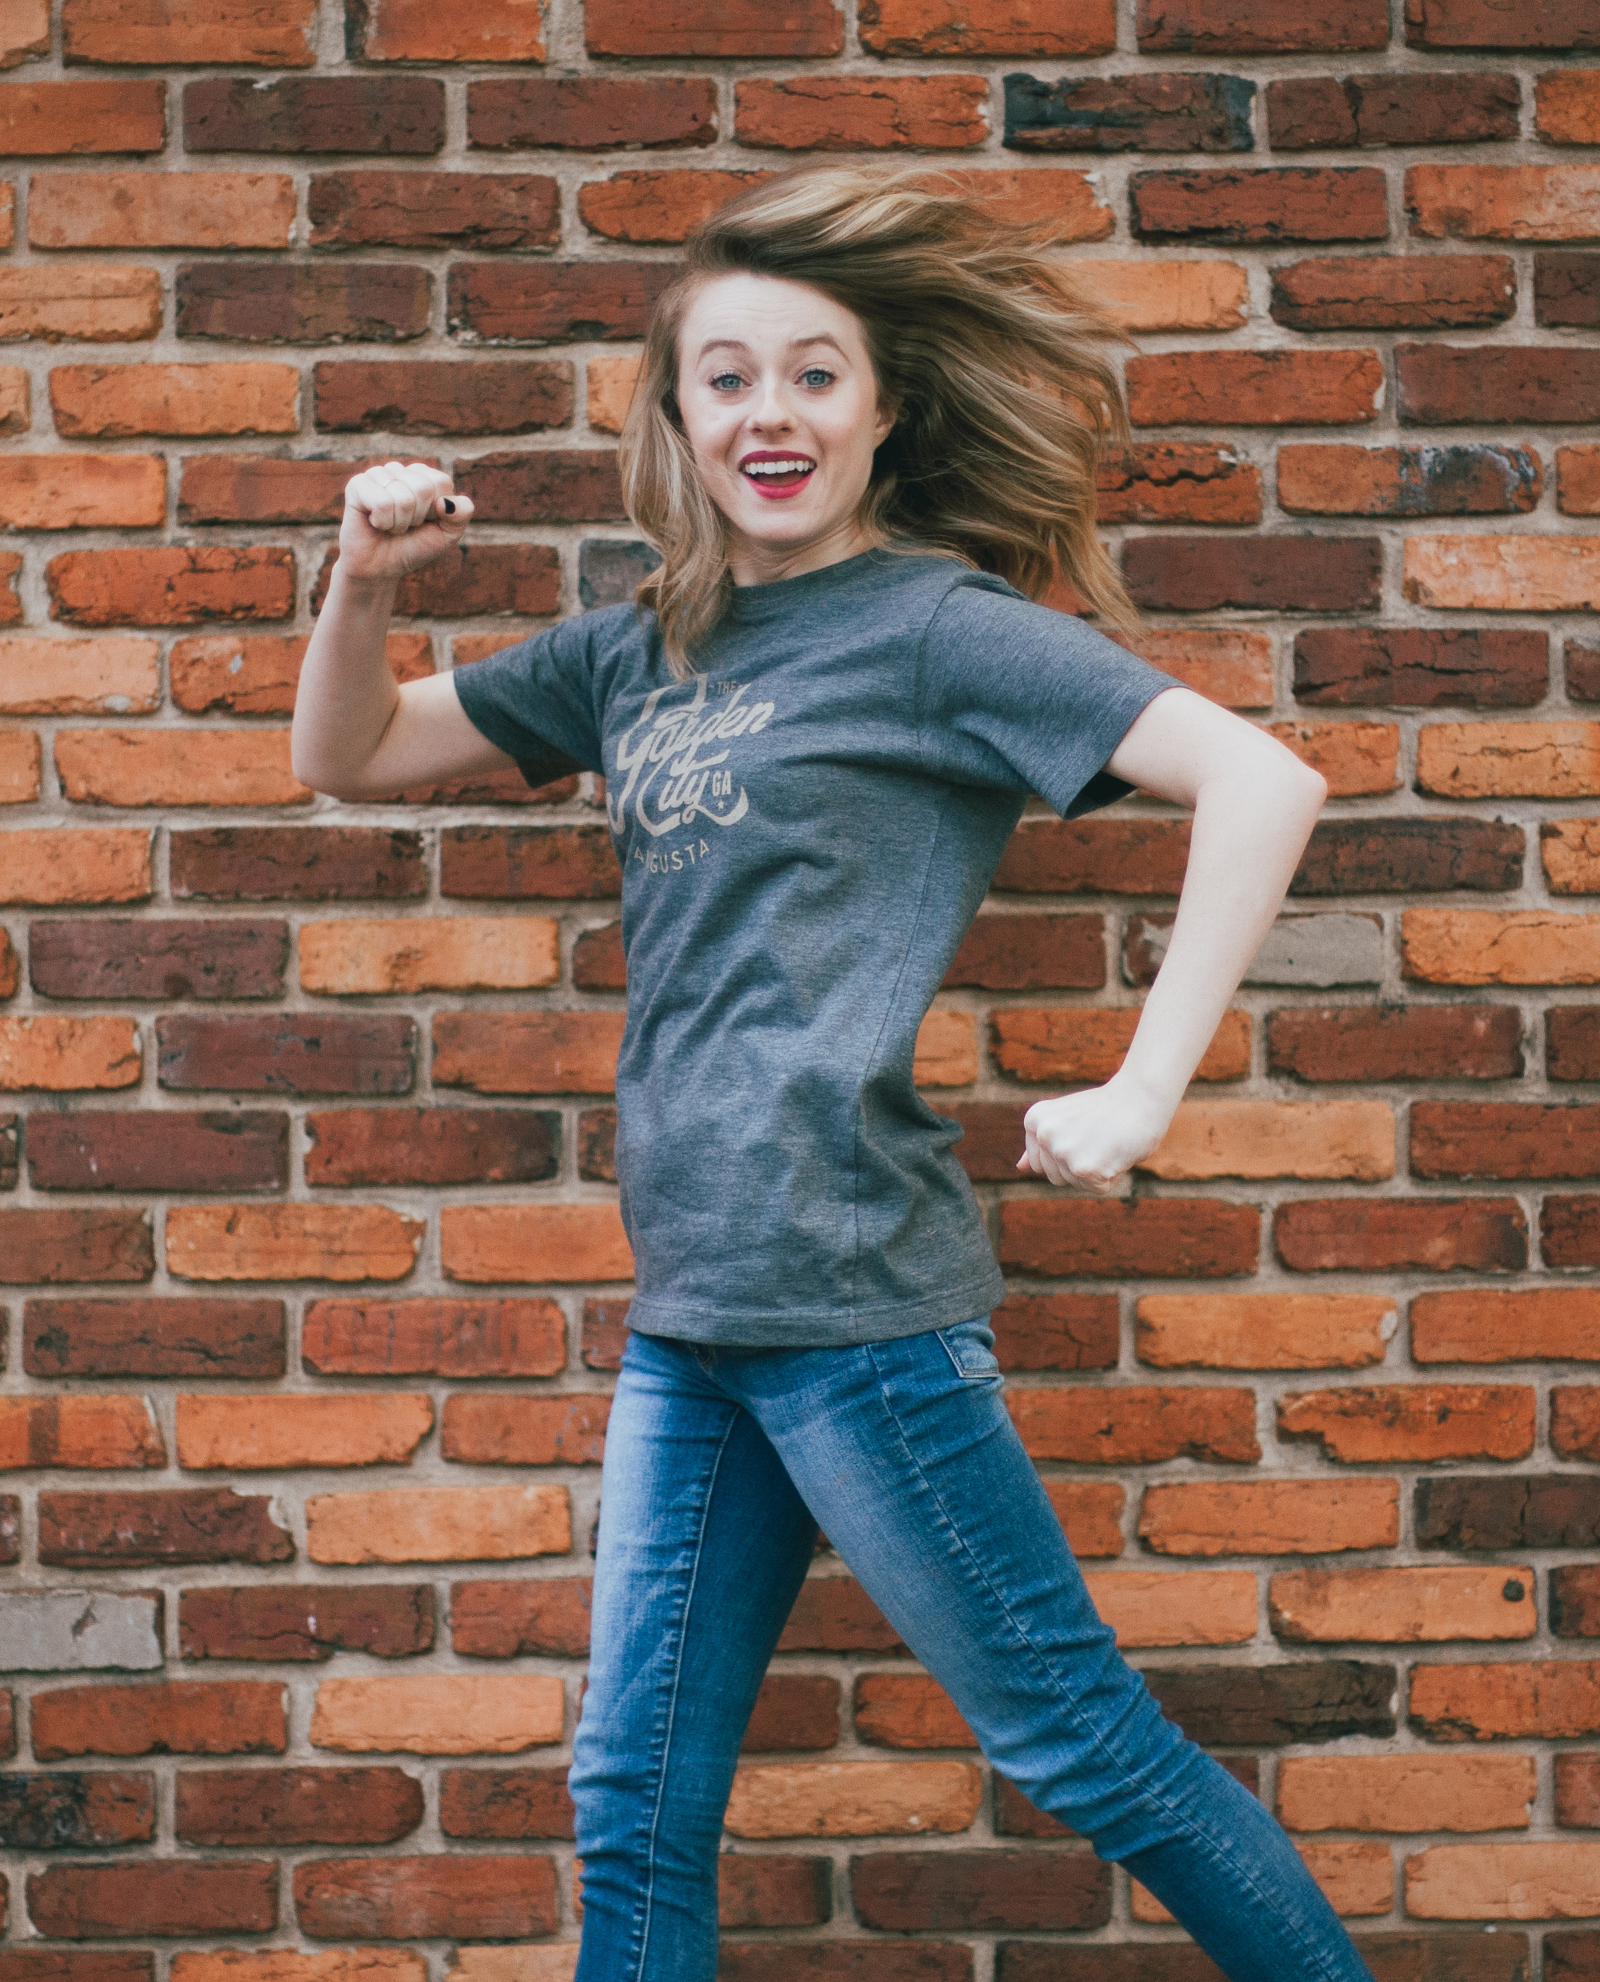 Woman jumping in front of a brick wall wearing blue vintage Garden City shirt